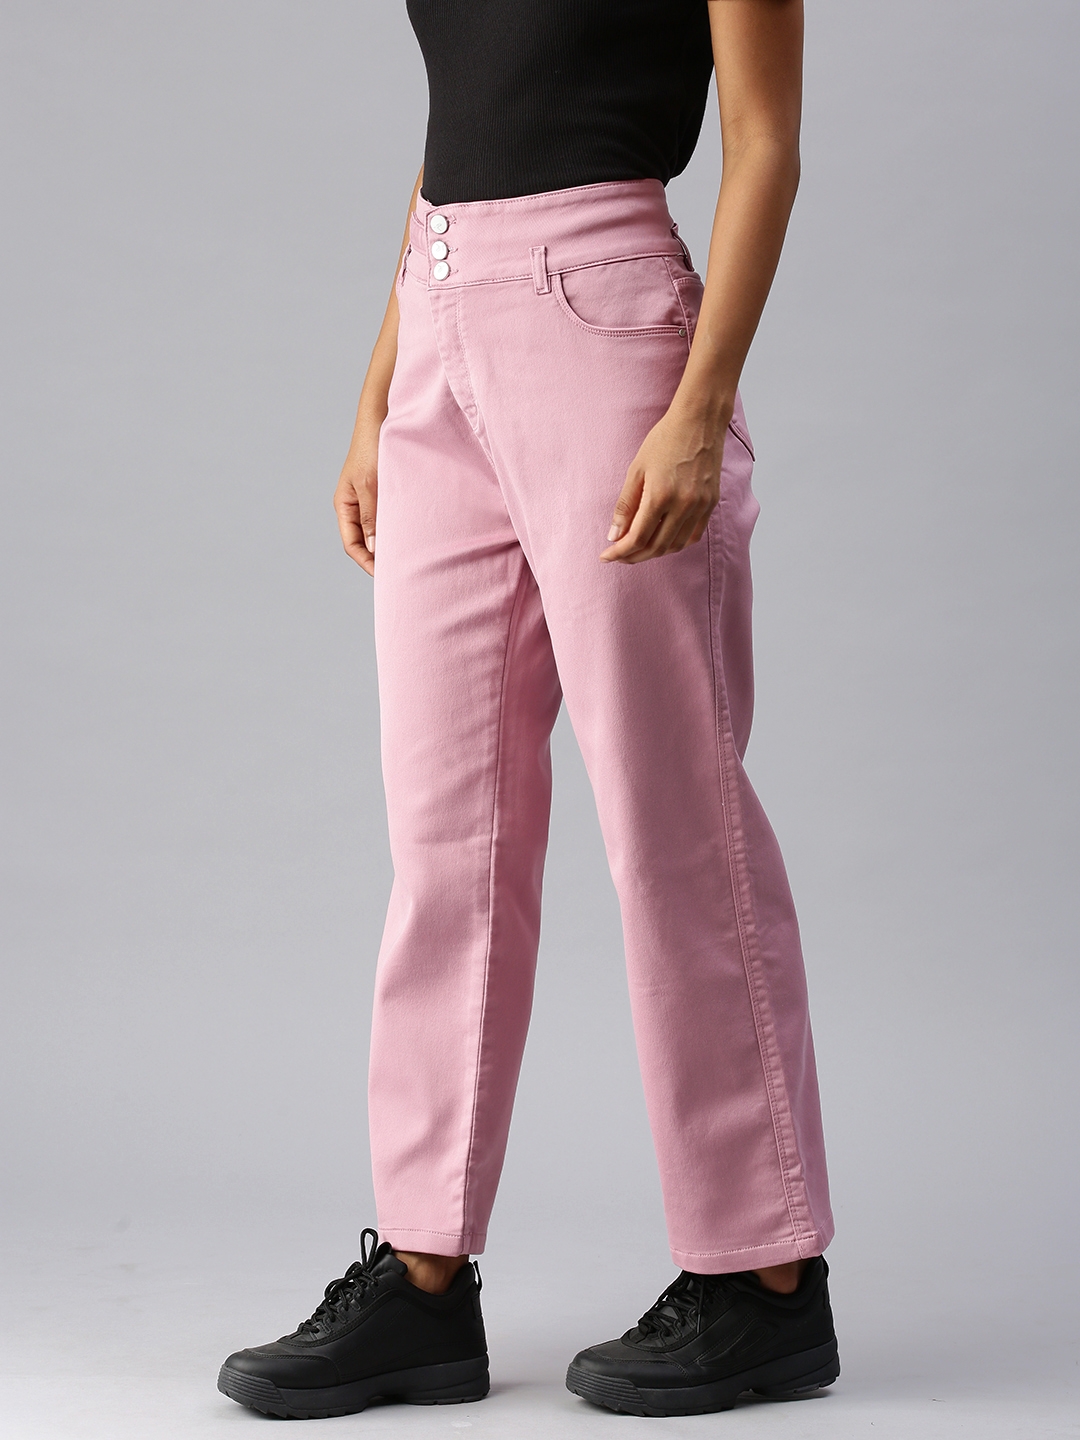 Showoff | SHOWOFF Women's Clean Look Pink Relaxed Fit Denim Jeans 1